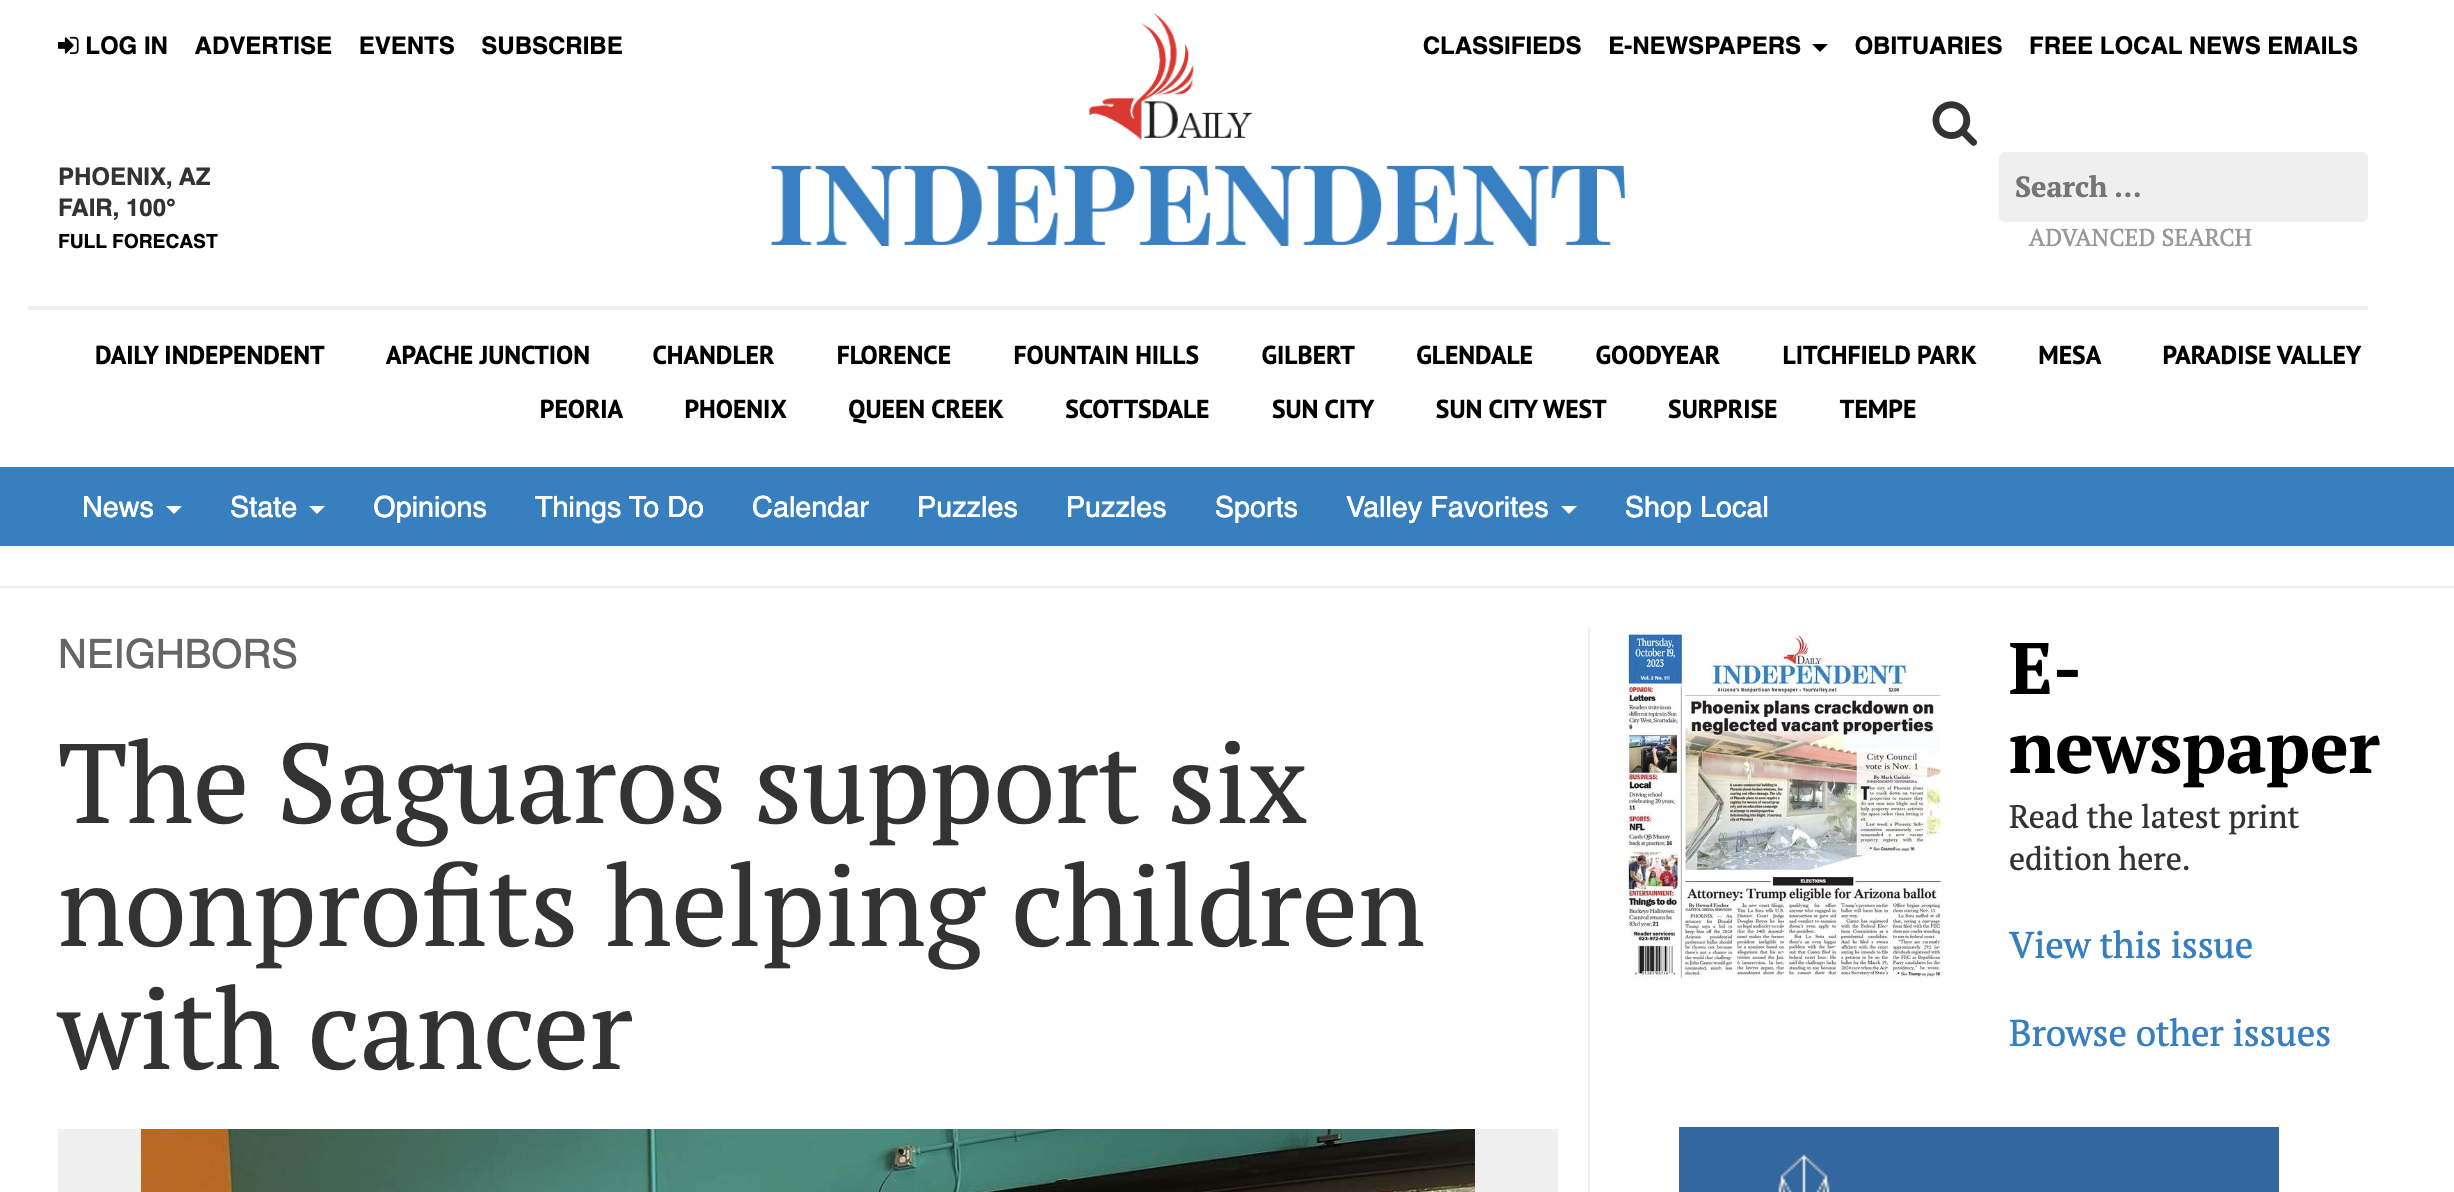 Daily Independent: The Saguaros support six nonprofits helping children with cancer (Copy)